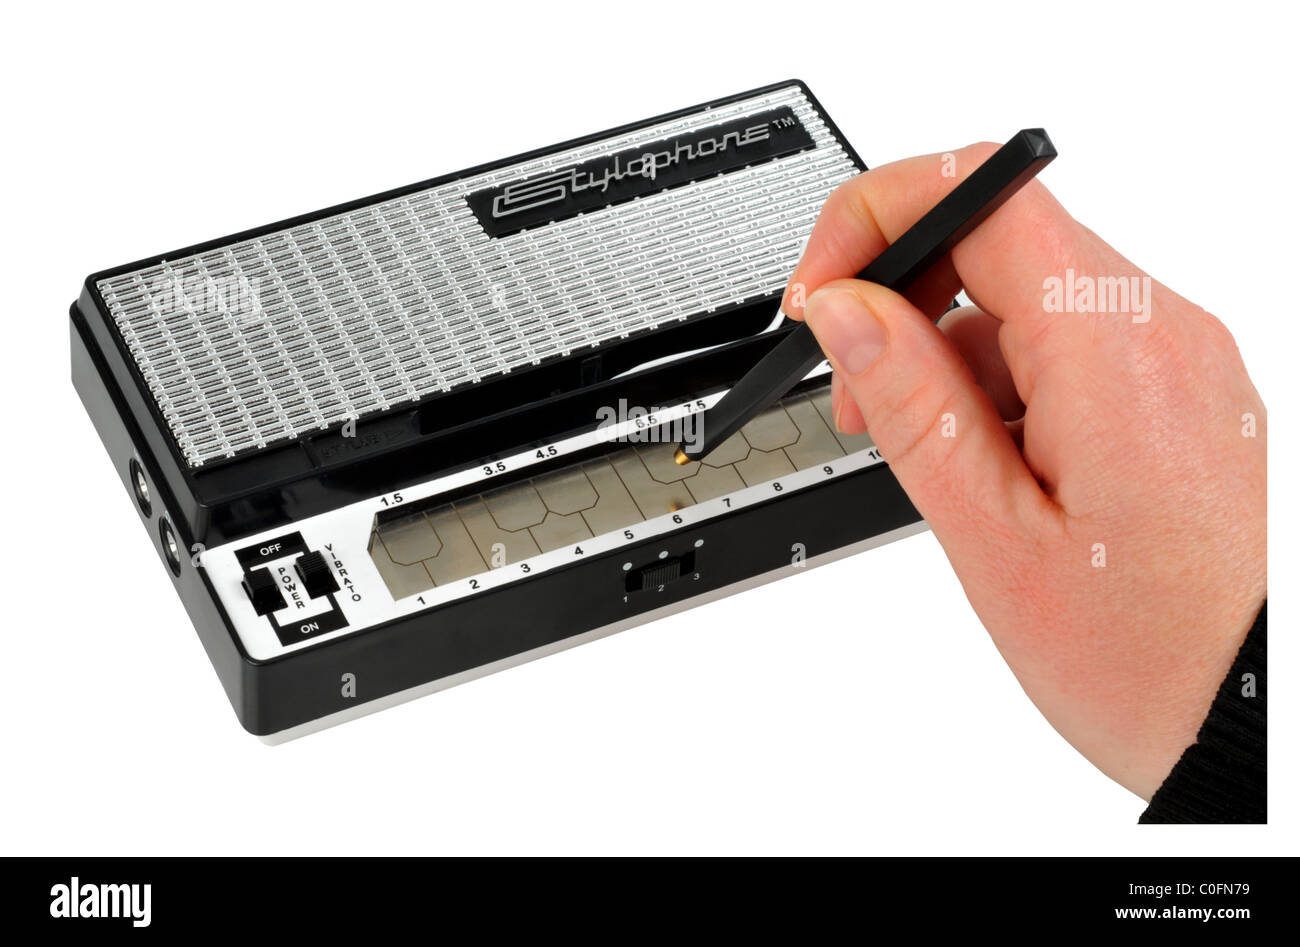 Stylophone, musical instrument or synthesizer, Stylophone on a ”white background” Stock Photo